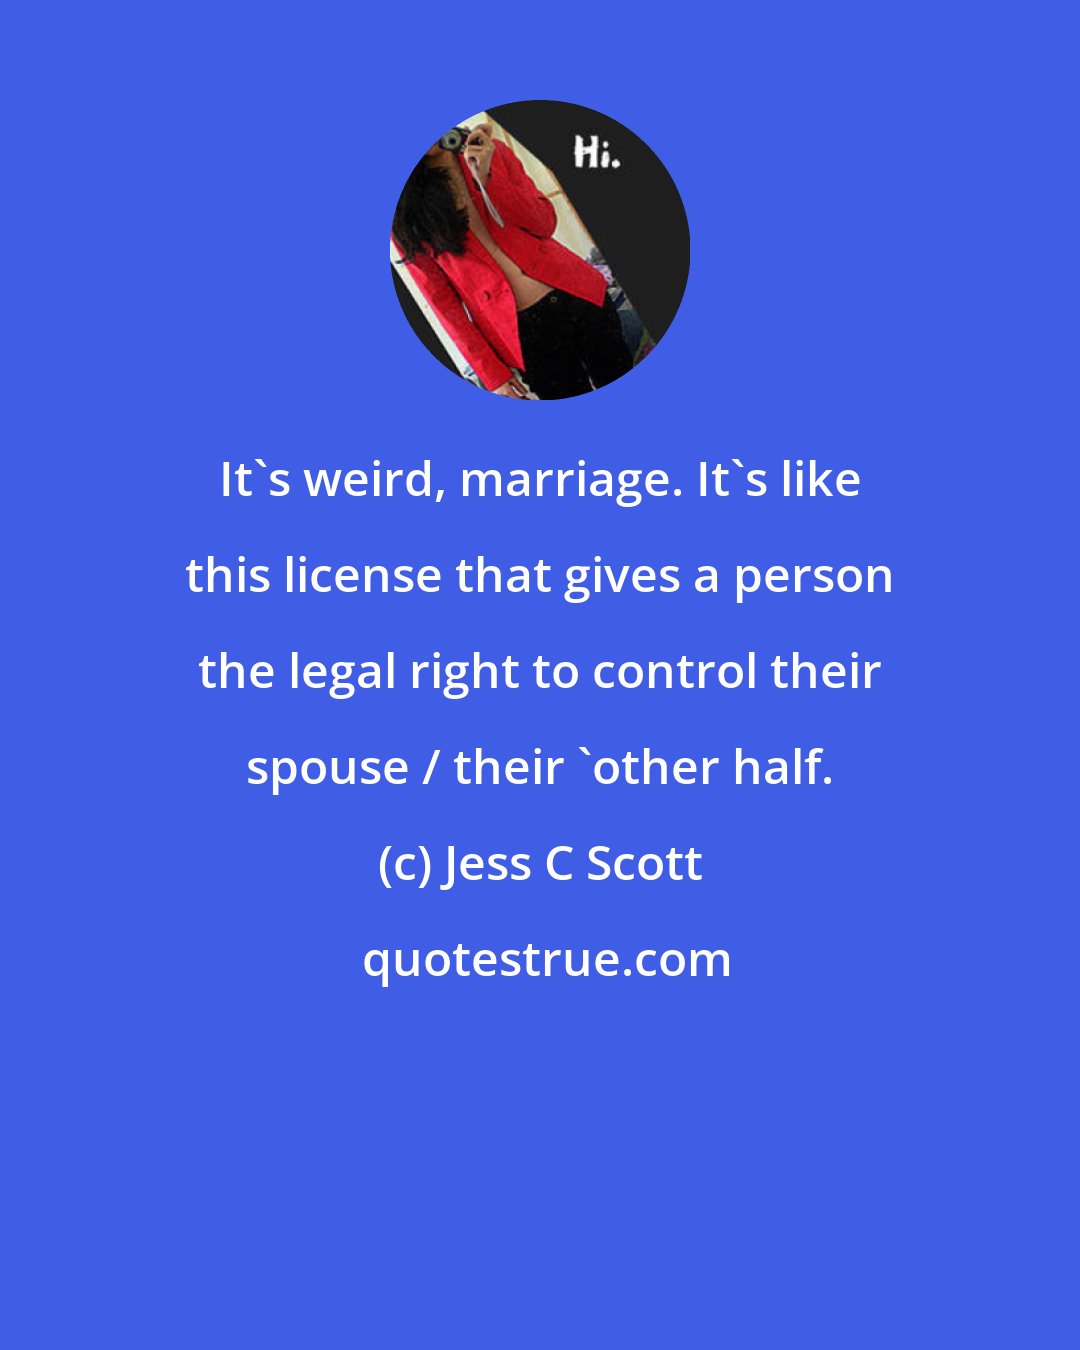 Jess C Scott: It's weird, marriage. It's like this license that gives a person the legal right to control their spouse / their 'other half.